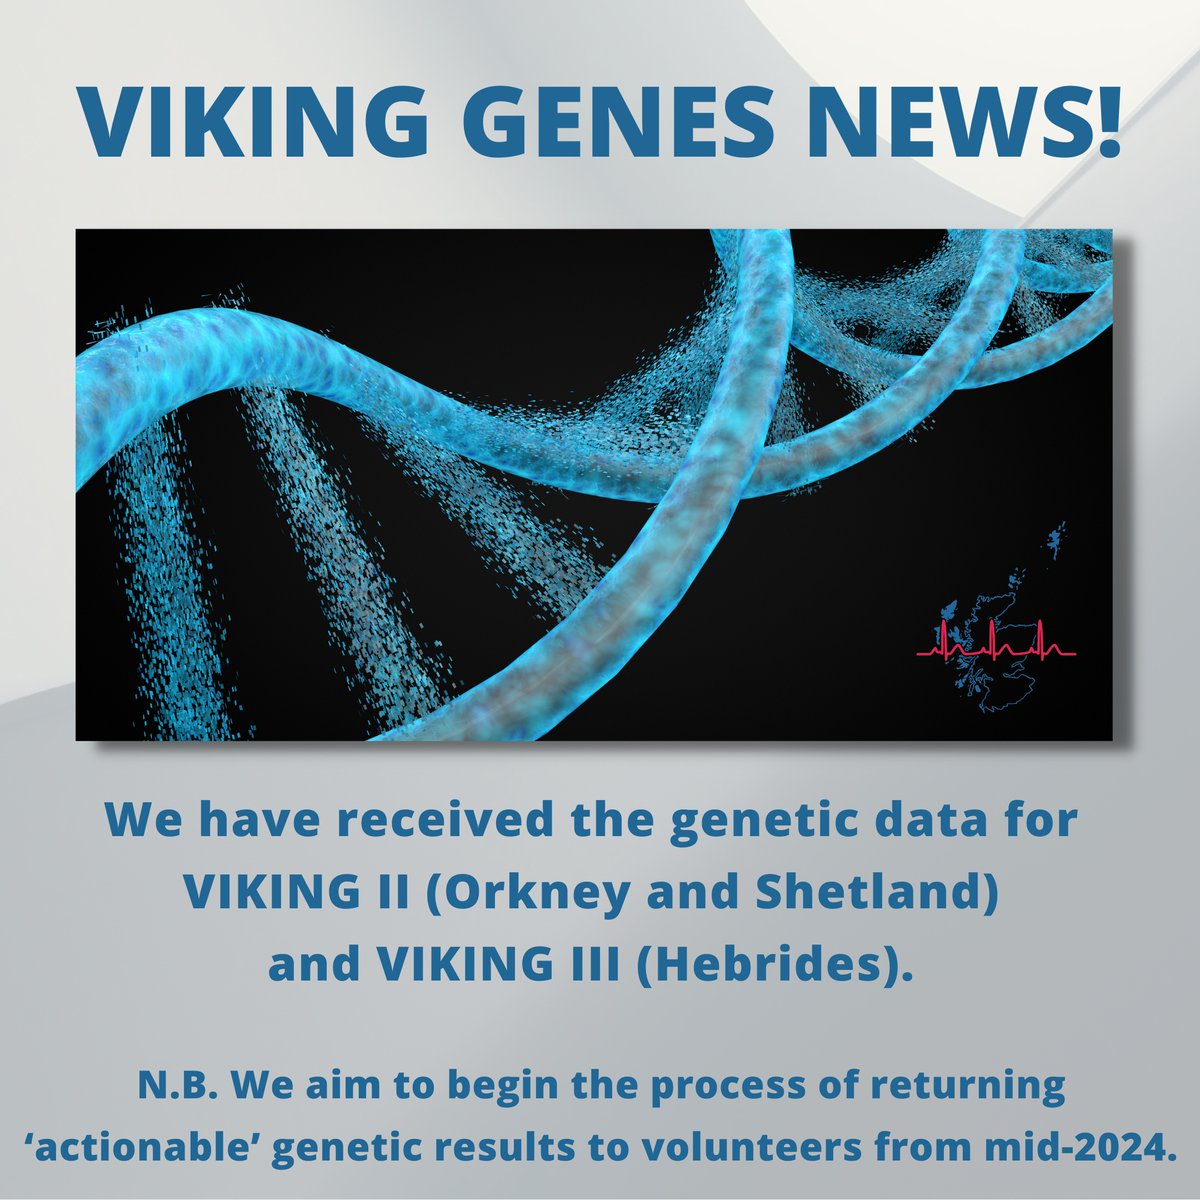 Viking Genes news! We have received the genetic data for our Viking II (Orkney and Shetland) and Viking III (Hebrides) studies and aim to begin the process of returning actionable results to volunteers from mid-2024. Read our policy on RoR below: 👇 viking.ed.ac.uk/for-viking-gen…